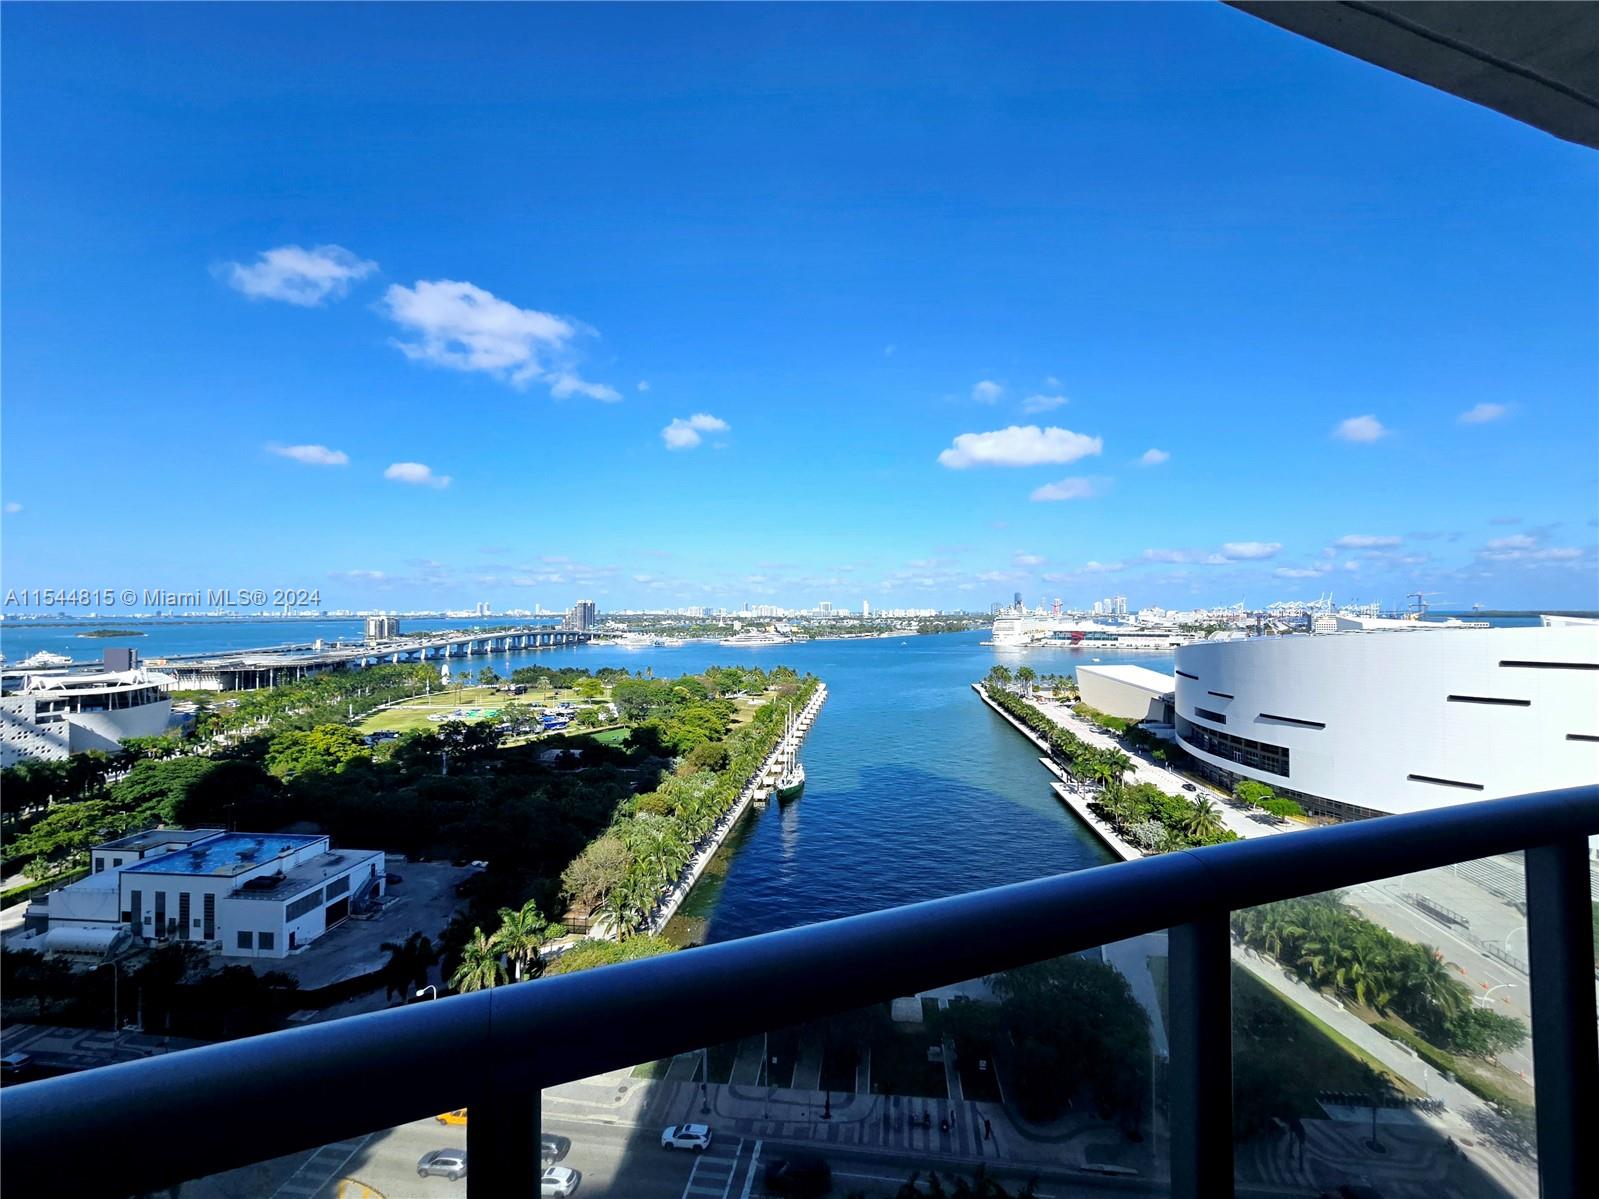 Enjoyable 1/1.5 partial furnished apartment, open balcony with the most breathtaking panoramic views in all of Miami of bay and city, within walking distance of performing arts district, Bayside Park, museums, shopping and FTX arena. Building amenities include hot tub, 2 pools, 24-hour concierge& security, fitness center, valet parking, club room, sand volleyball court, business center, BBQ grills & outdoor dining area. Wi-Fi Internet access throughout the common areas. Parking 12-38. Unit coming with storage locker # 242 bottom cage on the 11th floor. Motorized window shades​​‌​​​​‌​​‌‌​‌‌‌​​‌‌​‌‌‌​​‌‌​‌‌‌ (solar/blackout)